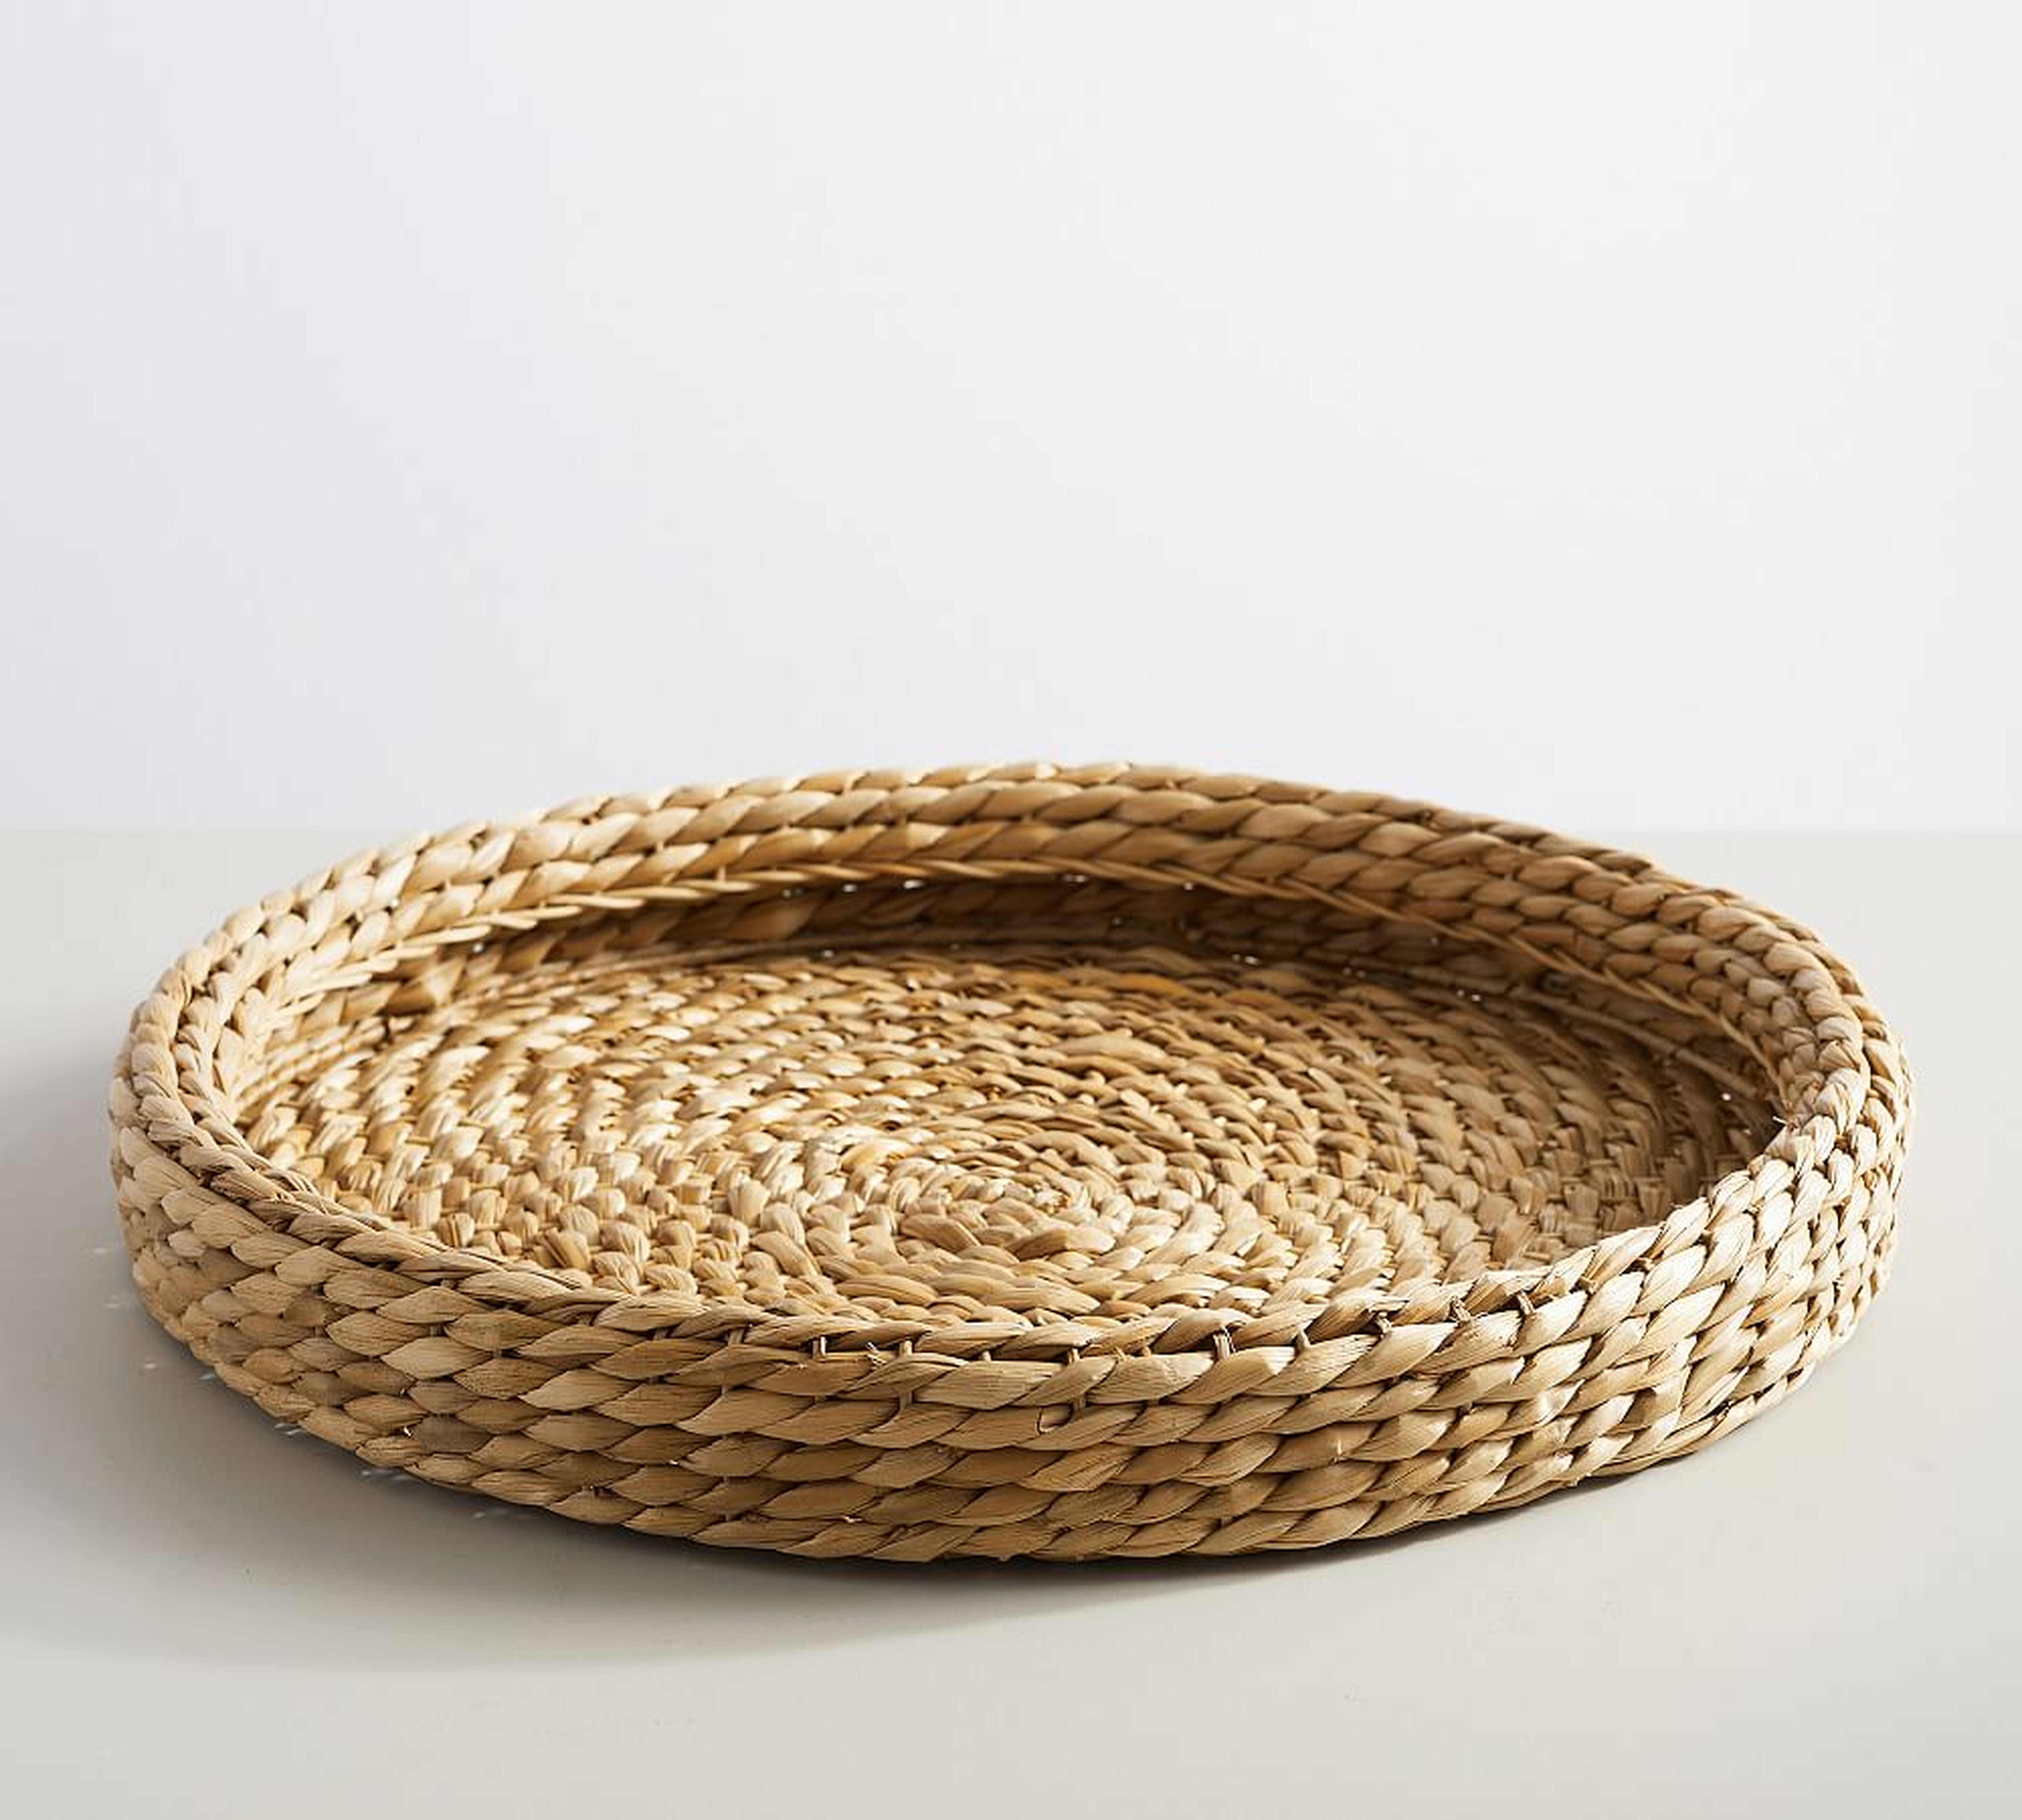 Handwoven Seagrass Round Tray, Large - Pottery Barn